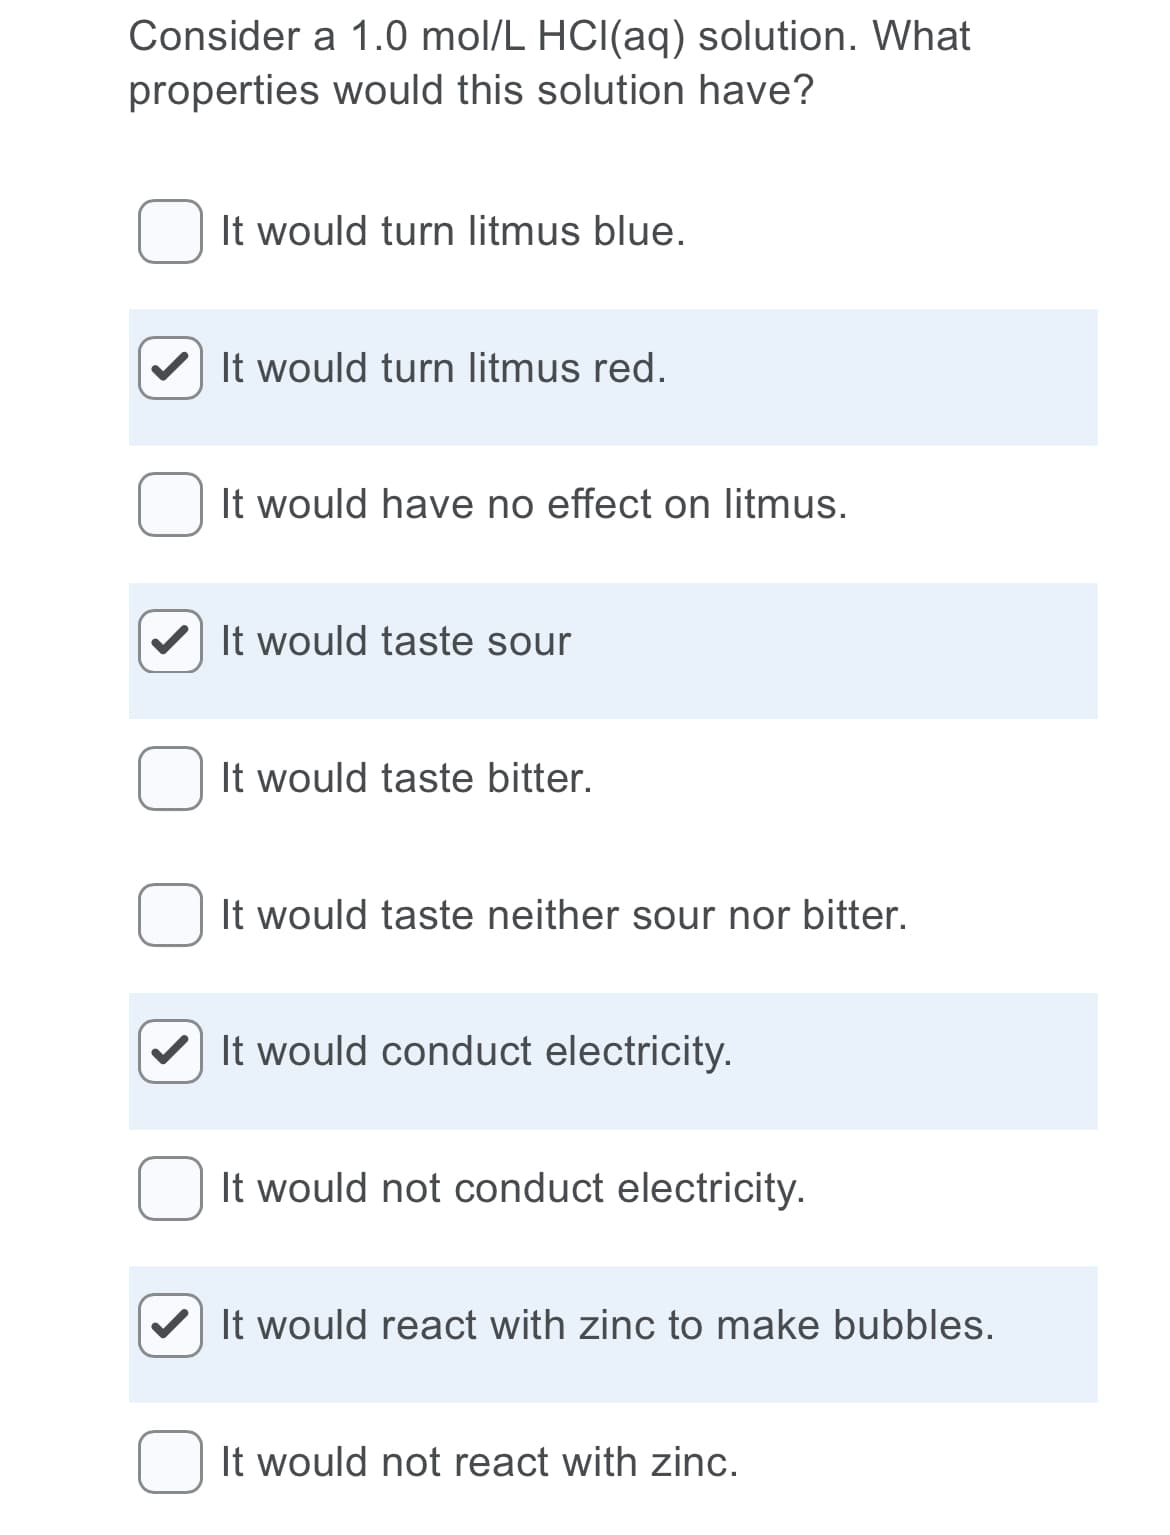 Consider a 1.0 mol/L HCI(aq) solution. What
properties would this solution have?
It would turn litmus blue.
It would turn litmus red.
It would have no effect on litmus.
It would taste sour
It would taste bitter.
It would taste neither sour nor bitter.
It would conduct electricity.
It would not conduct electricity.
It would react with zinc to make bubbles.
It would not react with zinc.
